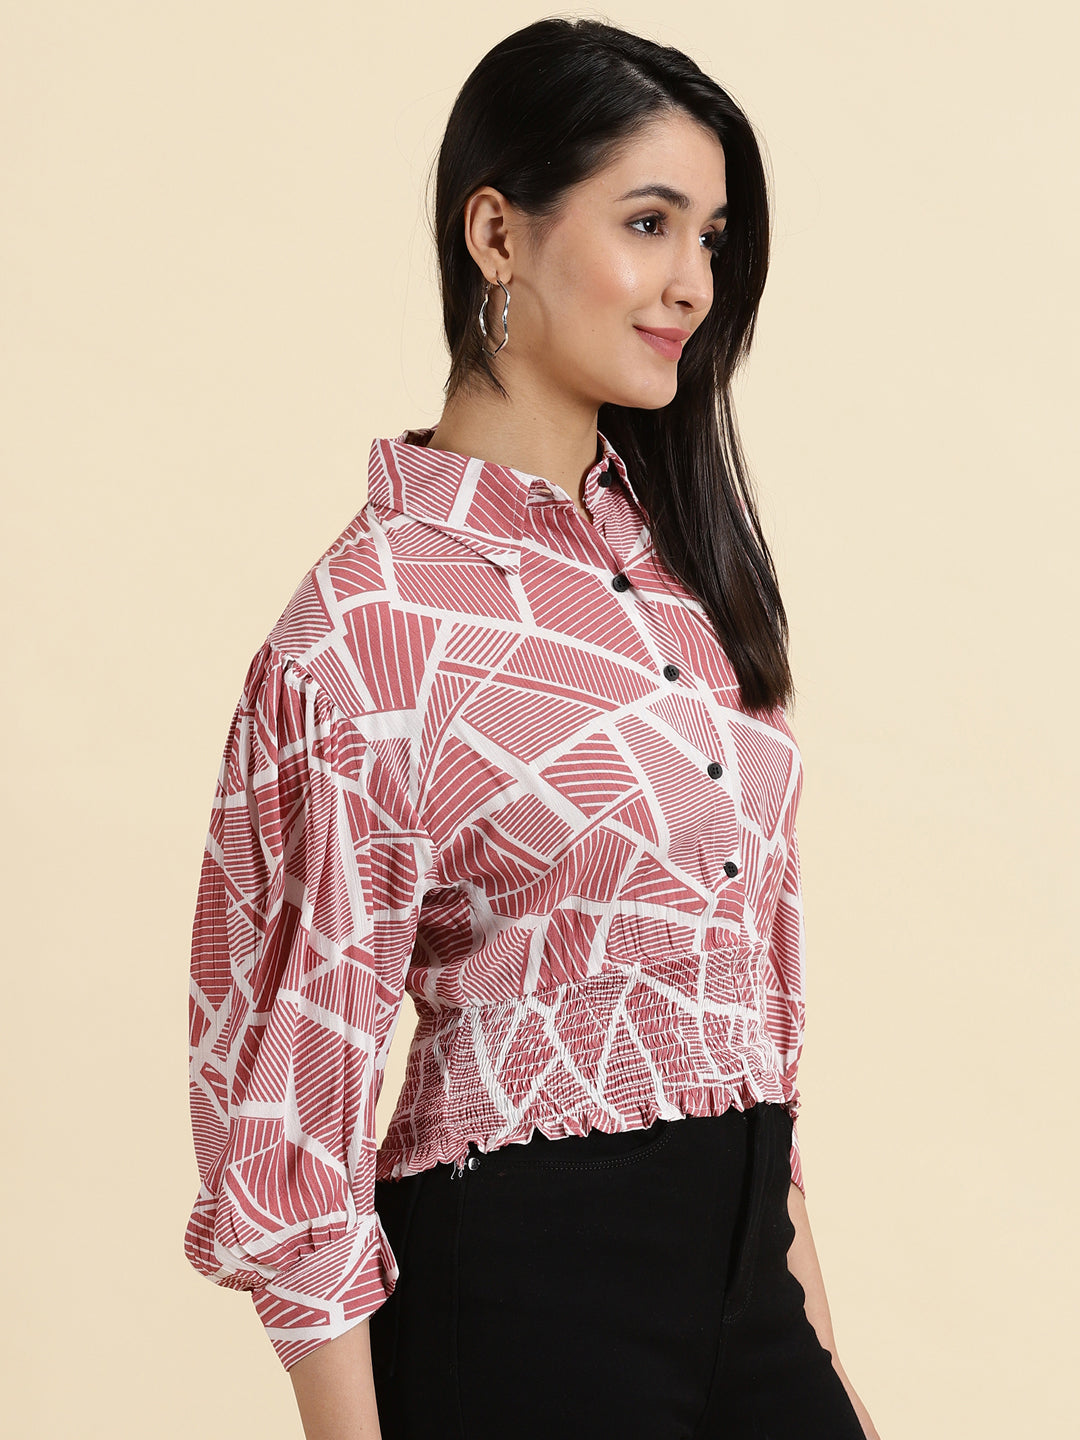 Women's Mauve Printed Cinched Waist Top